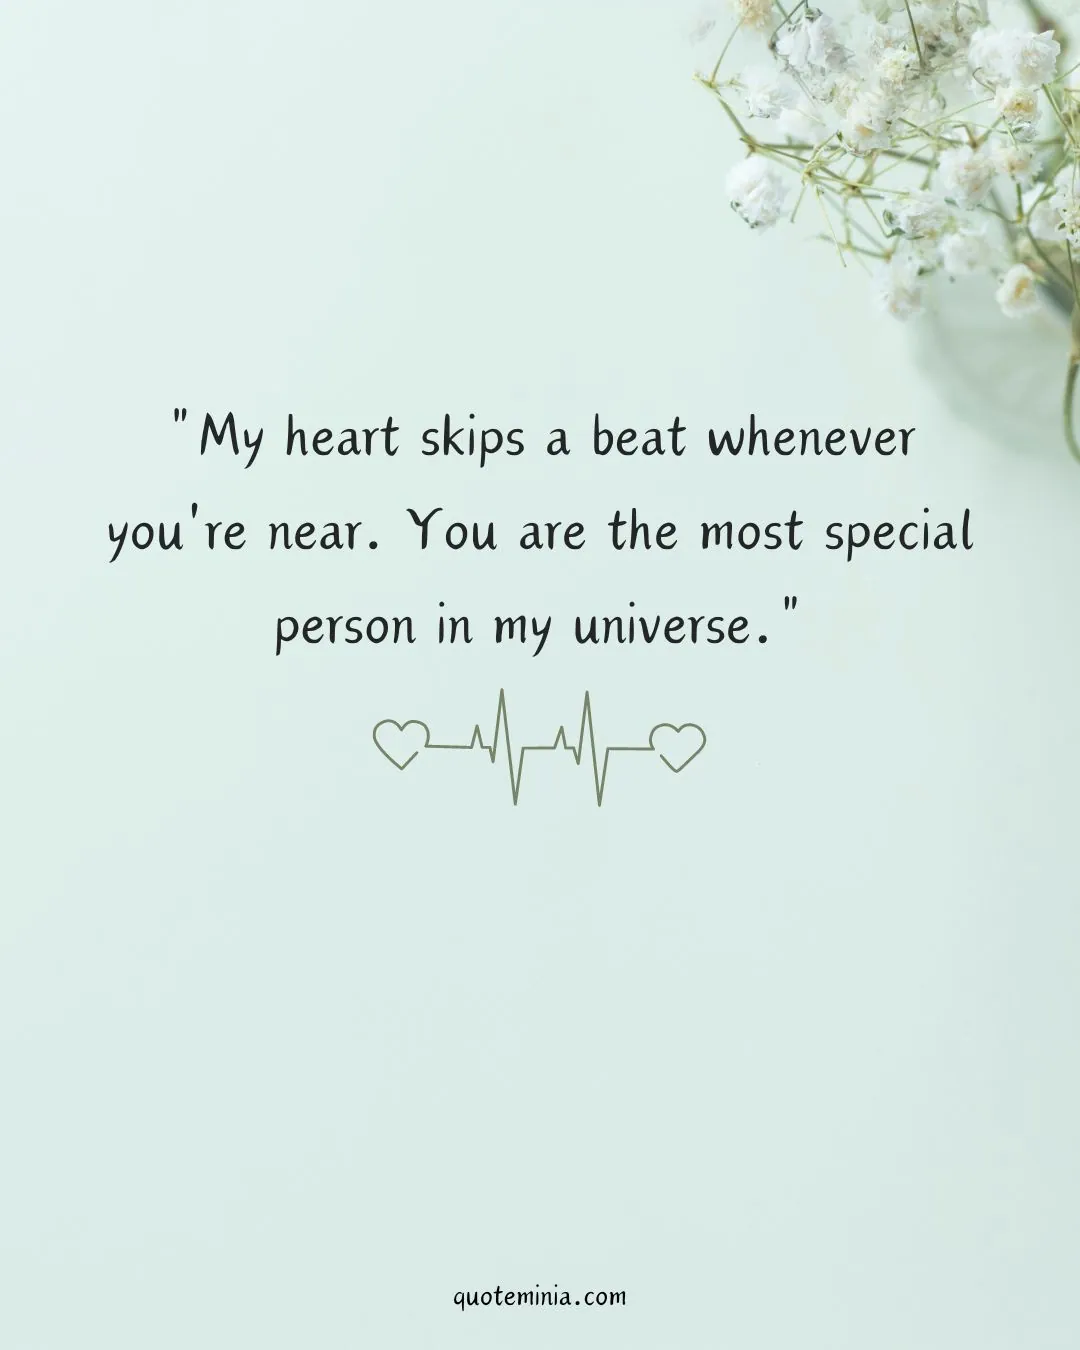 You Are So Special to Me Quotes Image 4